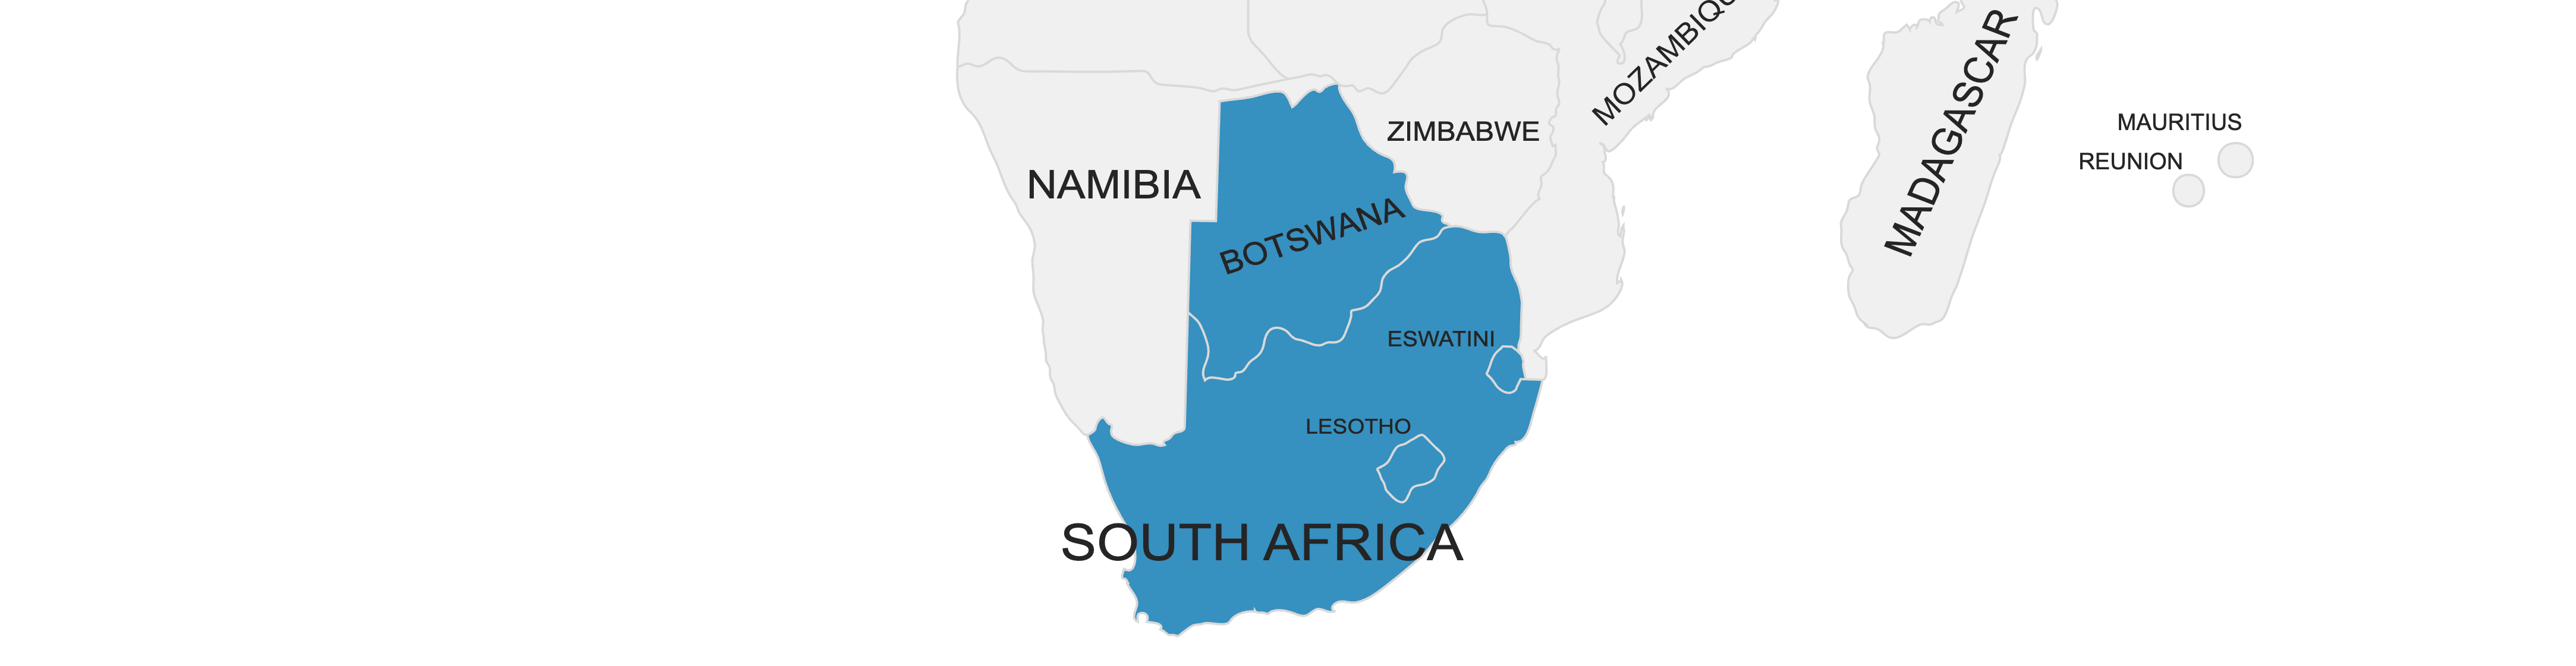 country-guessing-southern-africa-geometas